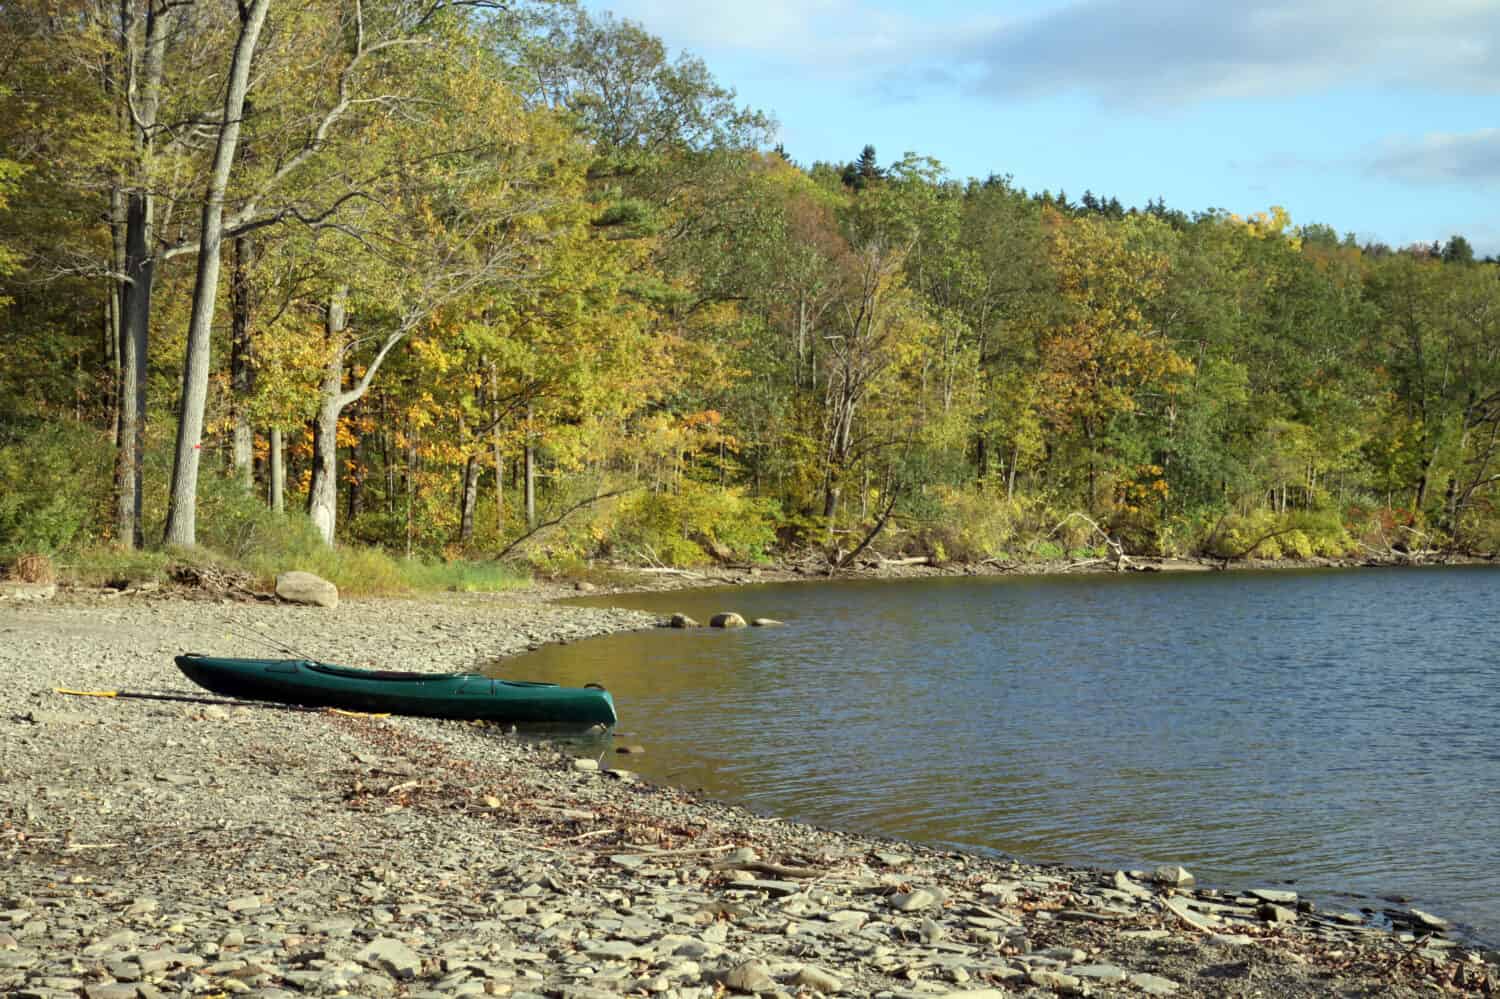 Kayak on the shore of Canadice Lake, New York, in autumn